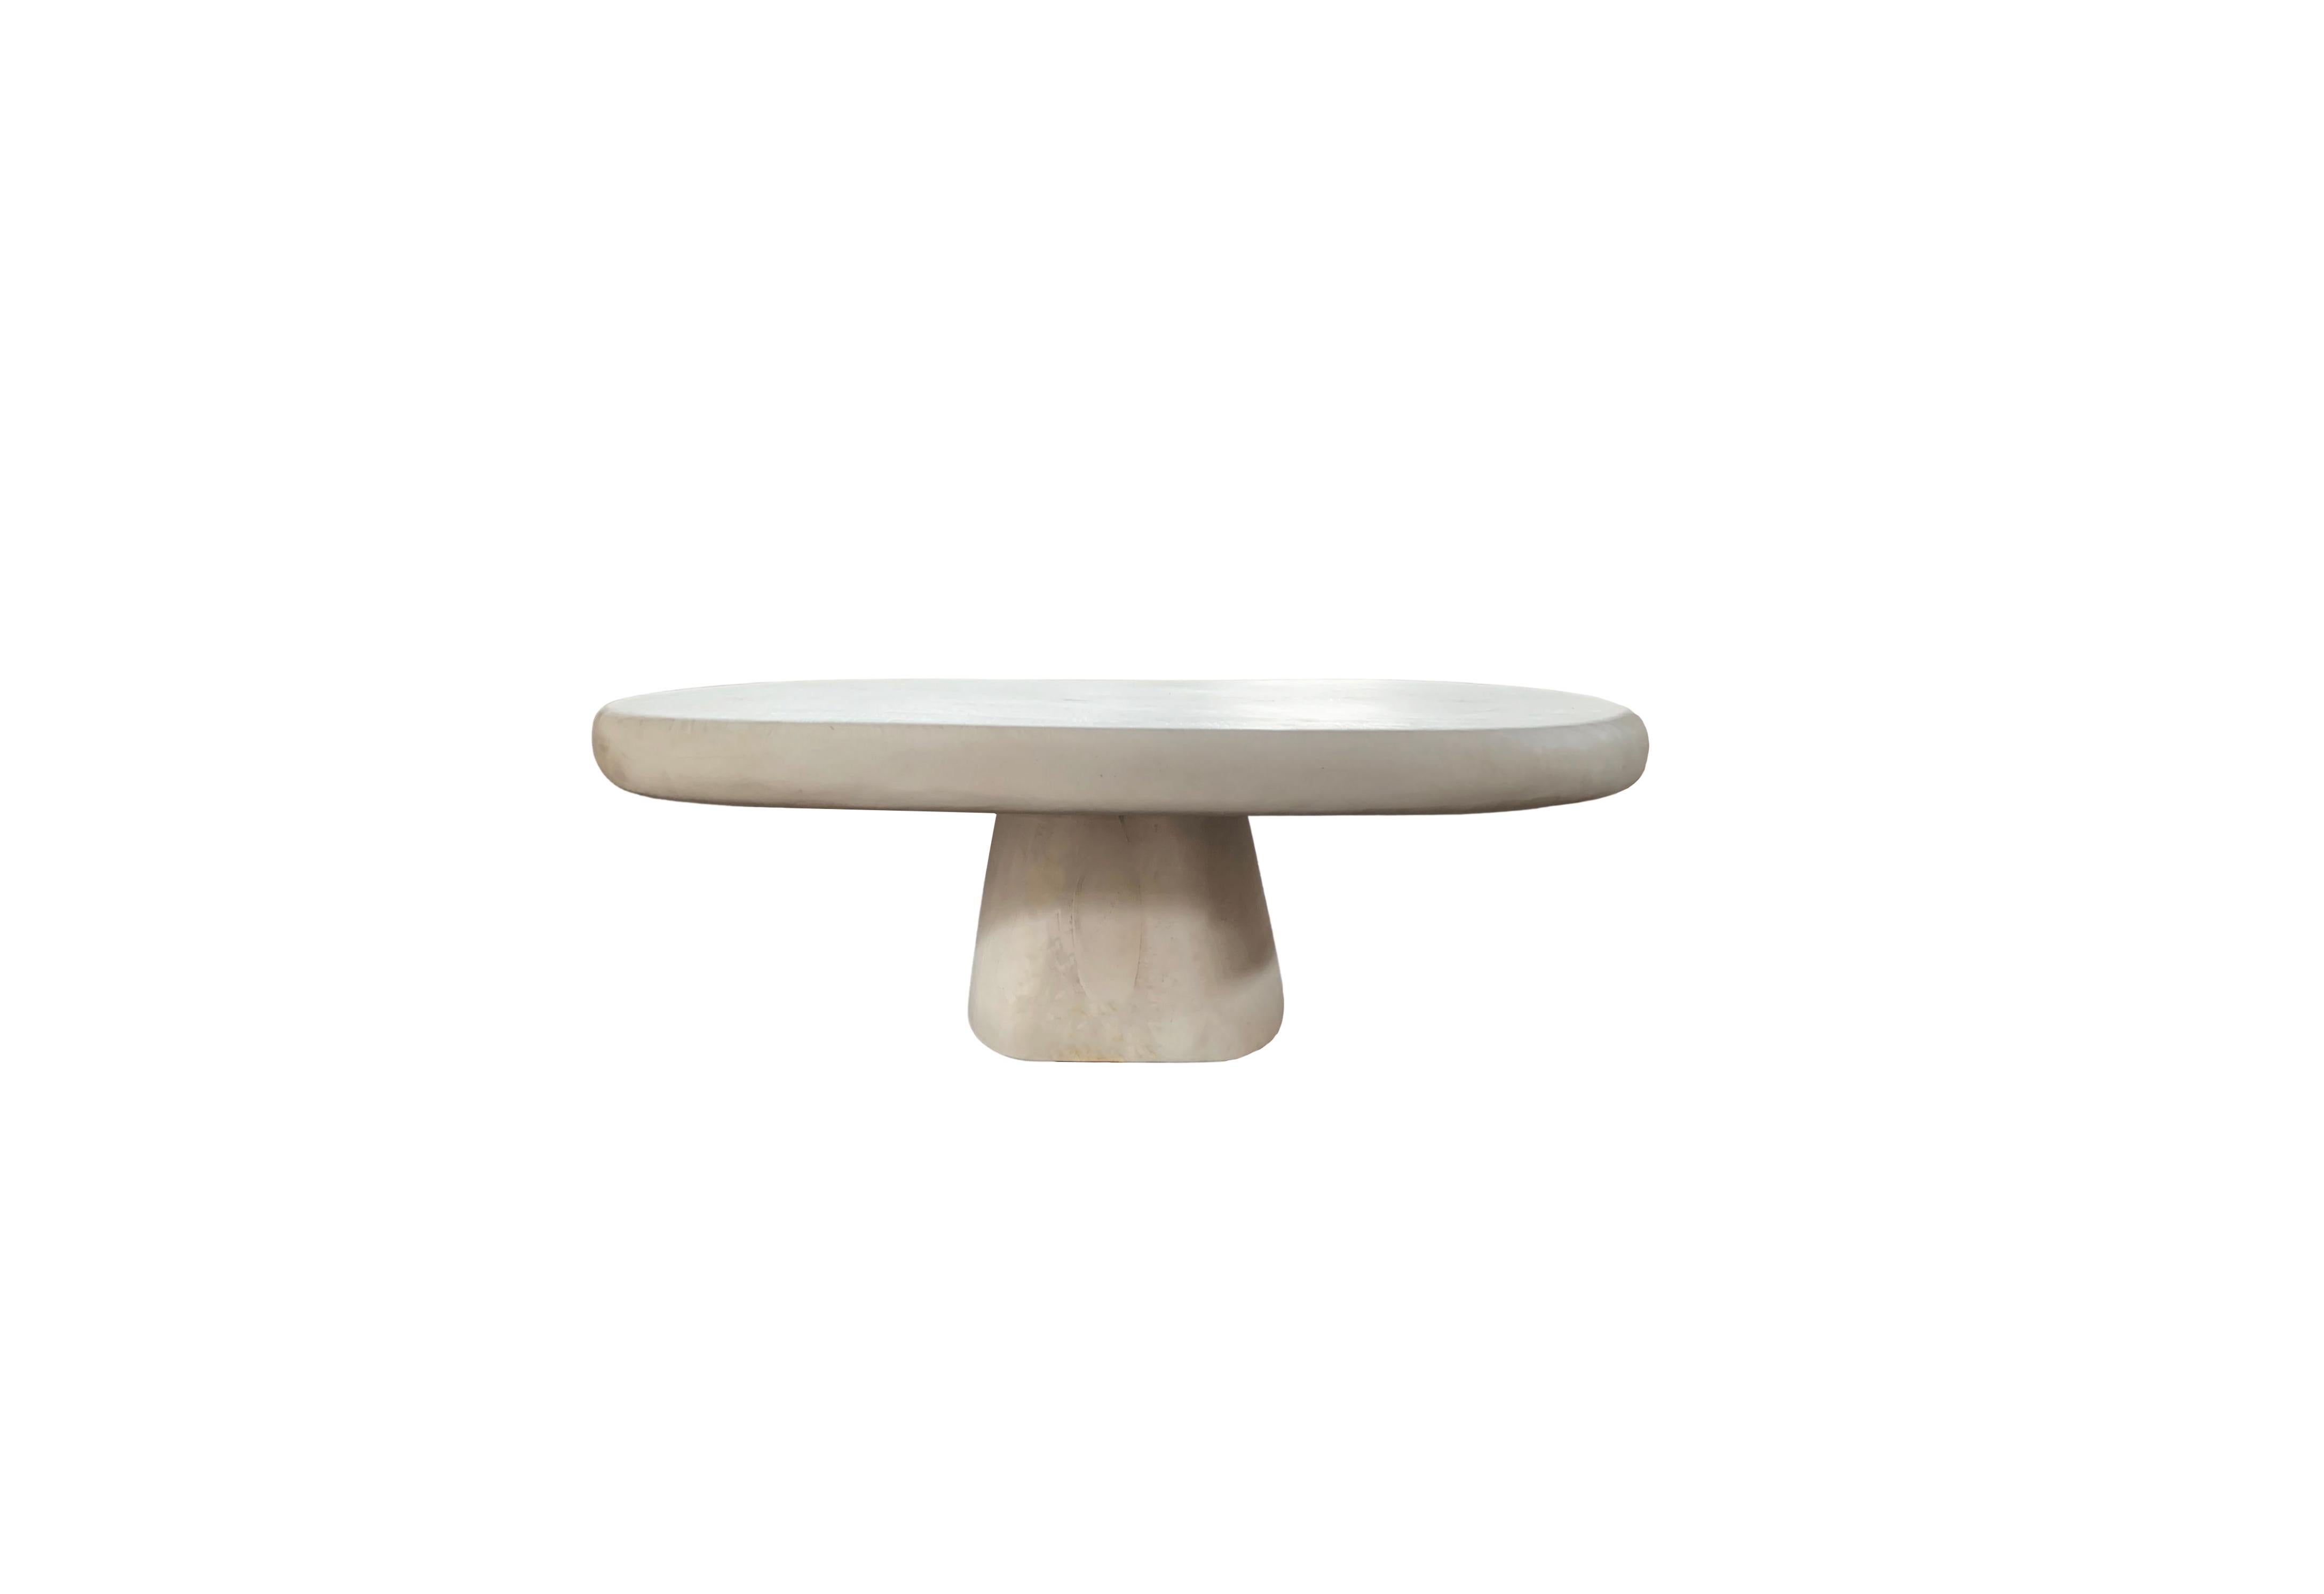 A sculptural round side table with a neutral pigment and subtle wood texture. A uniquely sculptural and versatile piece certain to invoke conversation. It was crafted from a solid block of mango wood. It features a bleached finish to achieve its